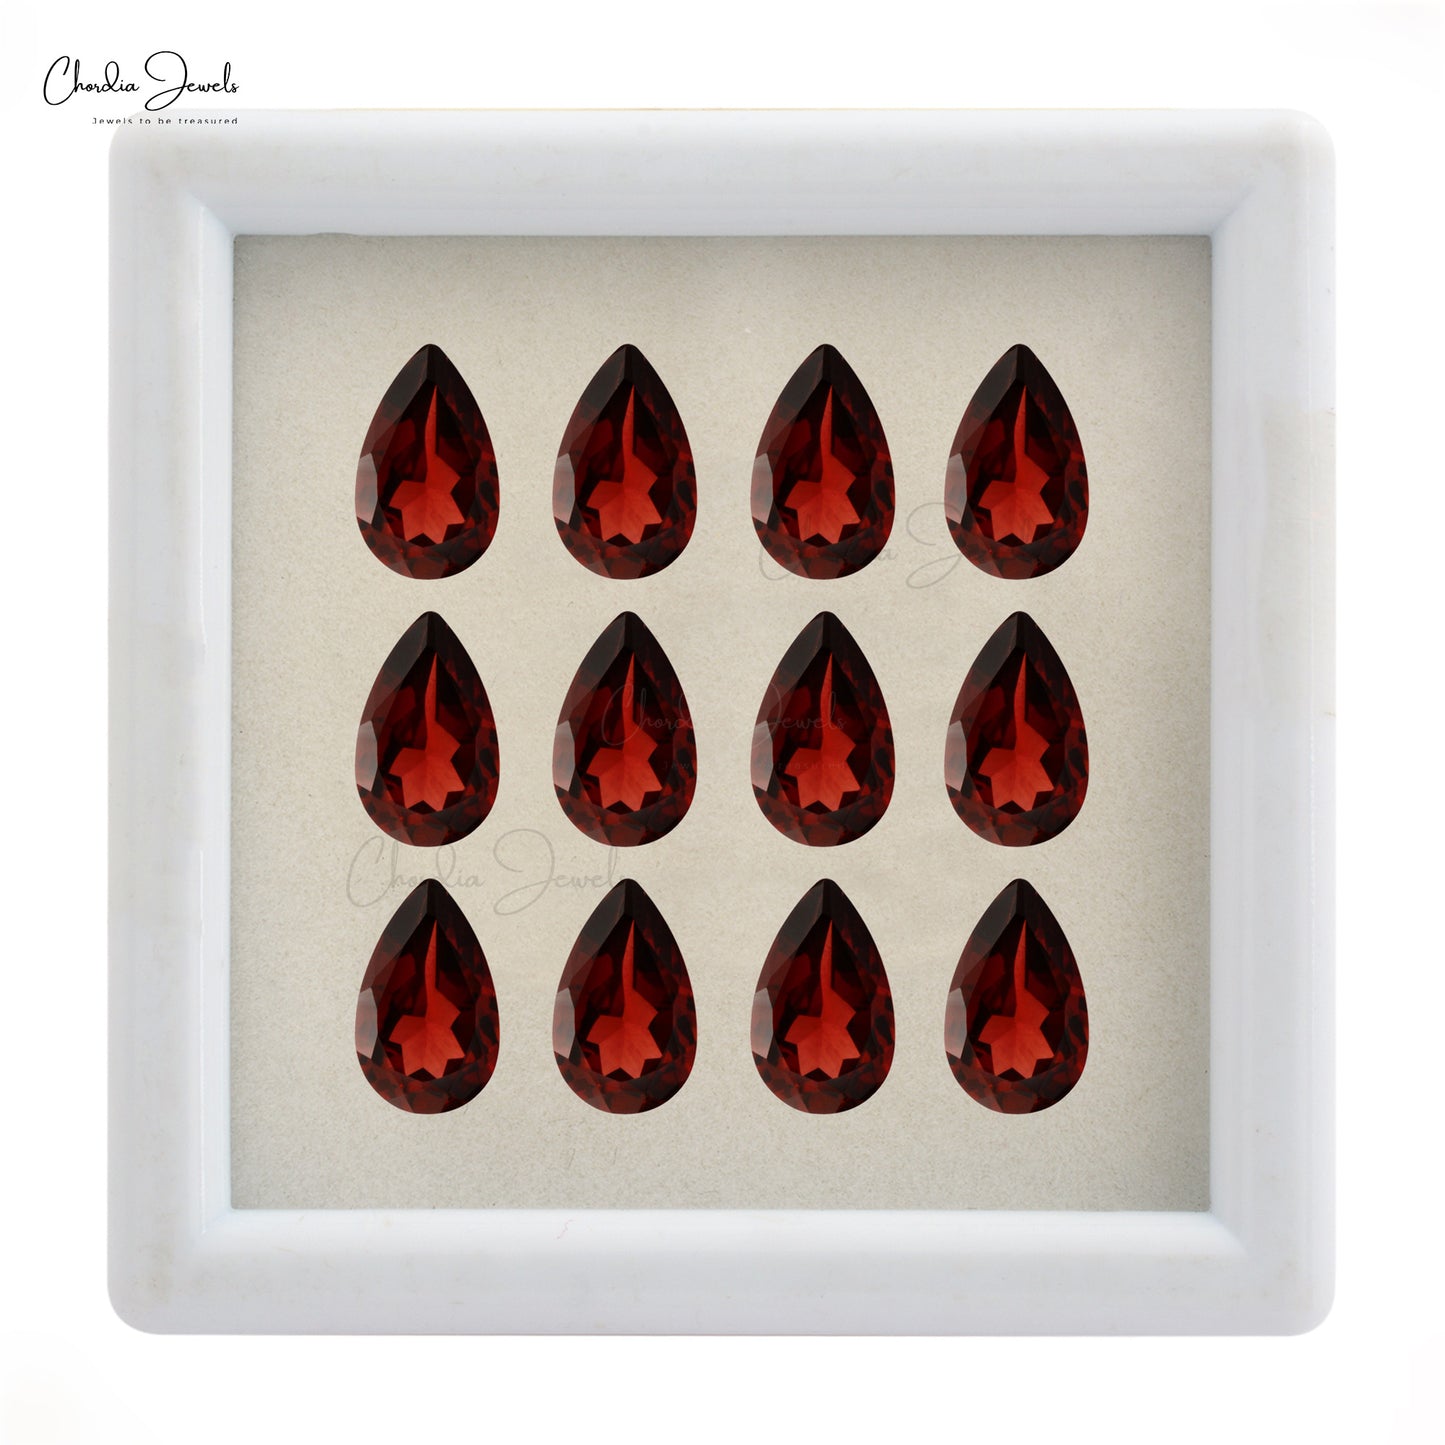 Genuine Garnet Pear Faceted AAA Grade for Jewelry Setting, 1 Piece